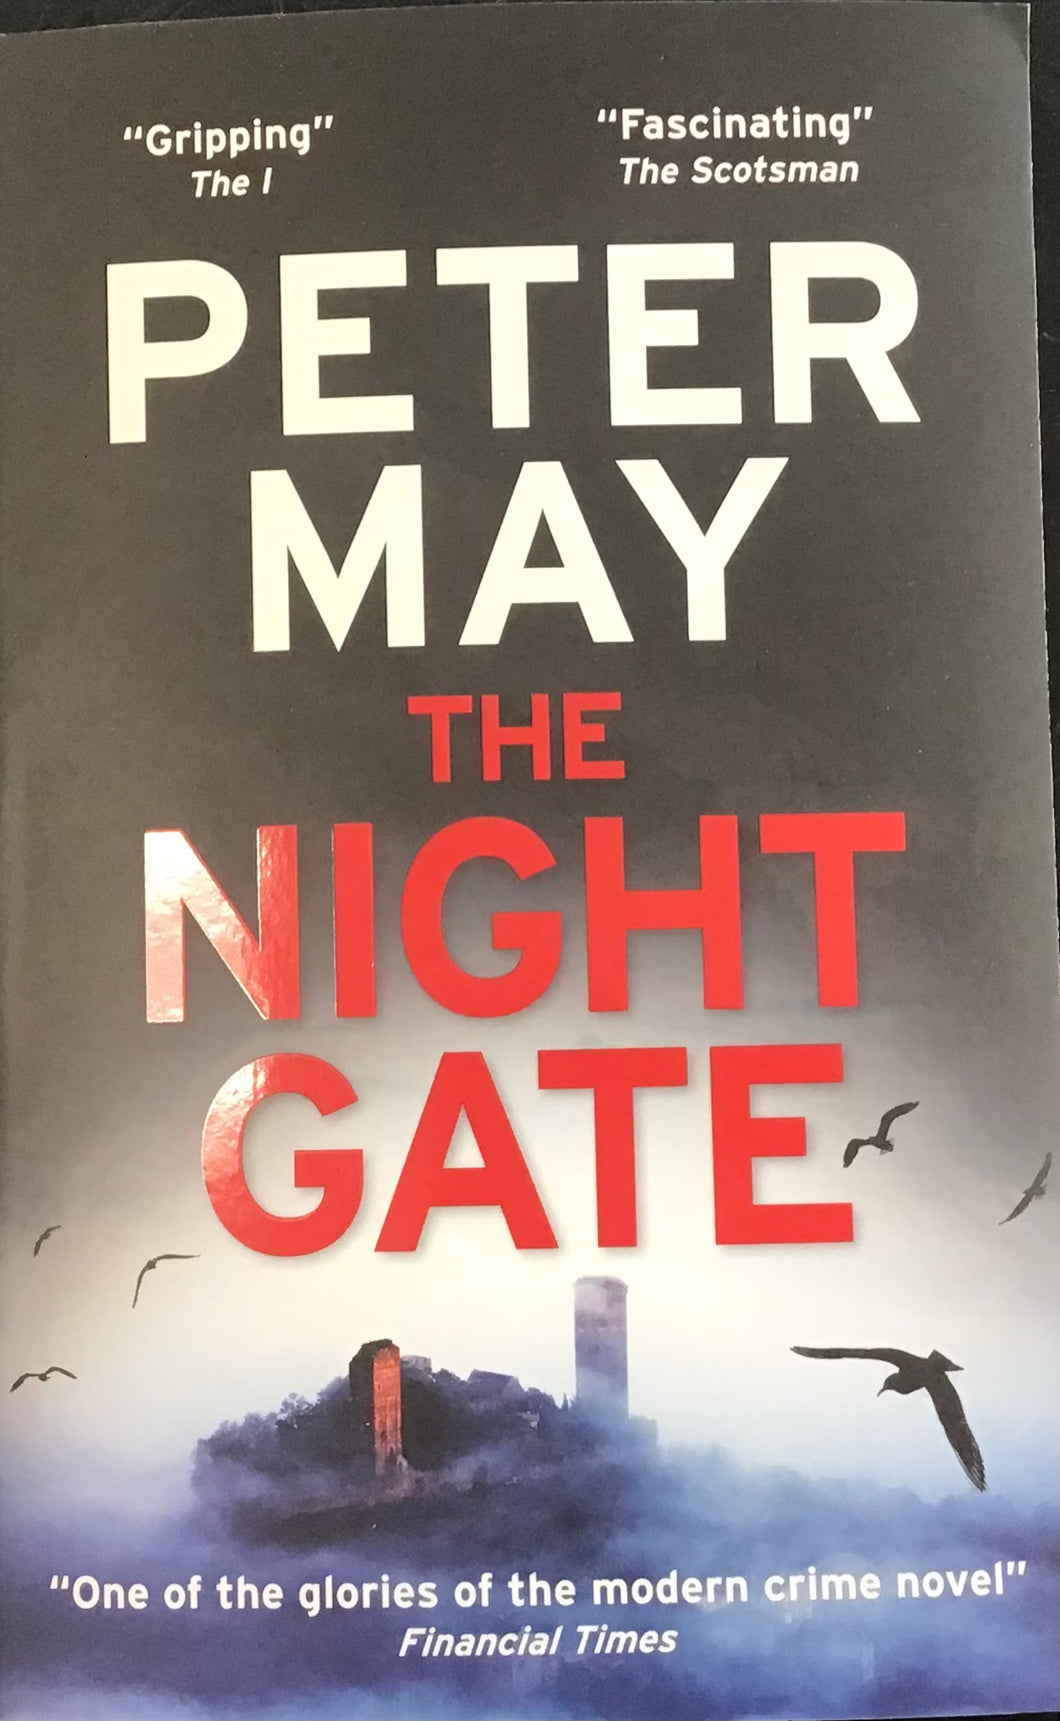 The Night Gate, Peter May